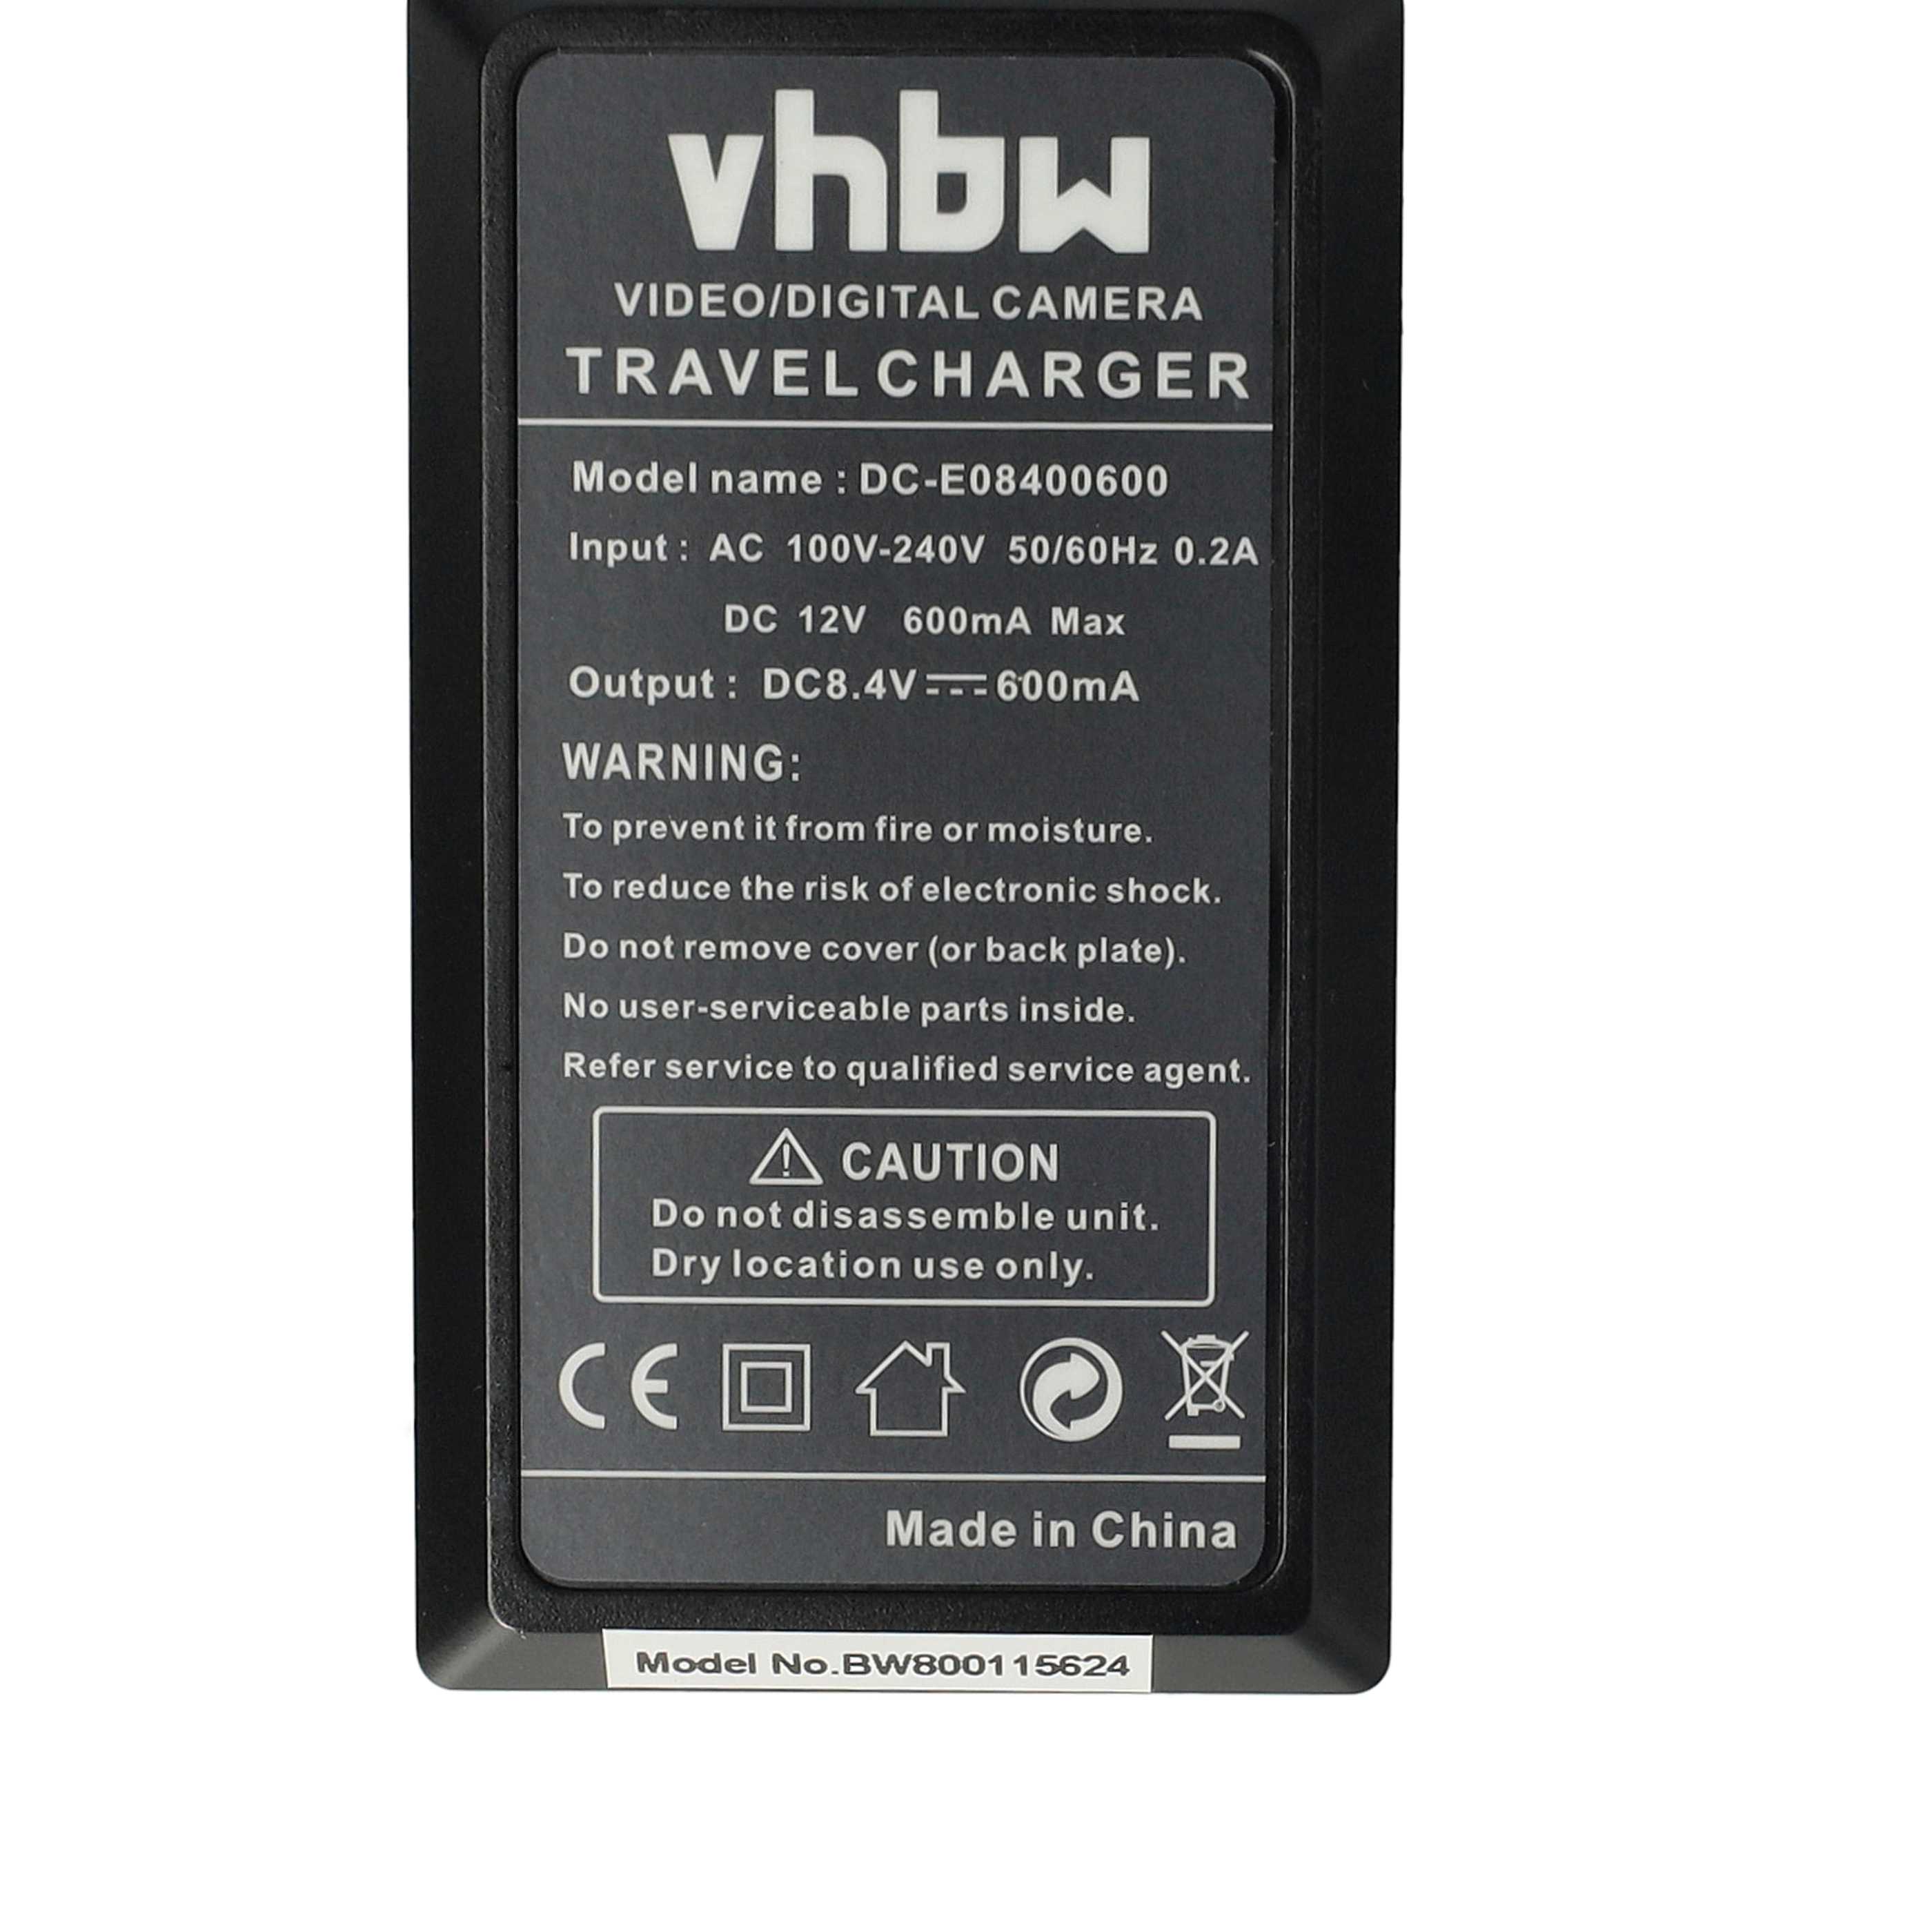 Battery Charger suitable for Sony NP-FZ100 Camera etc. 